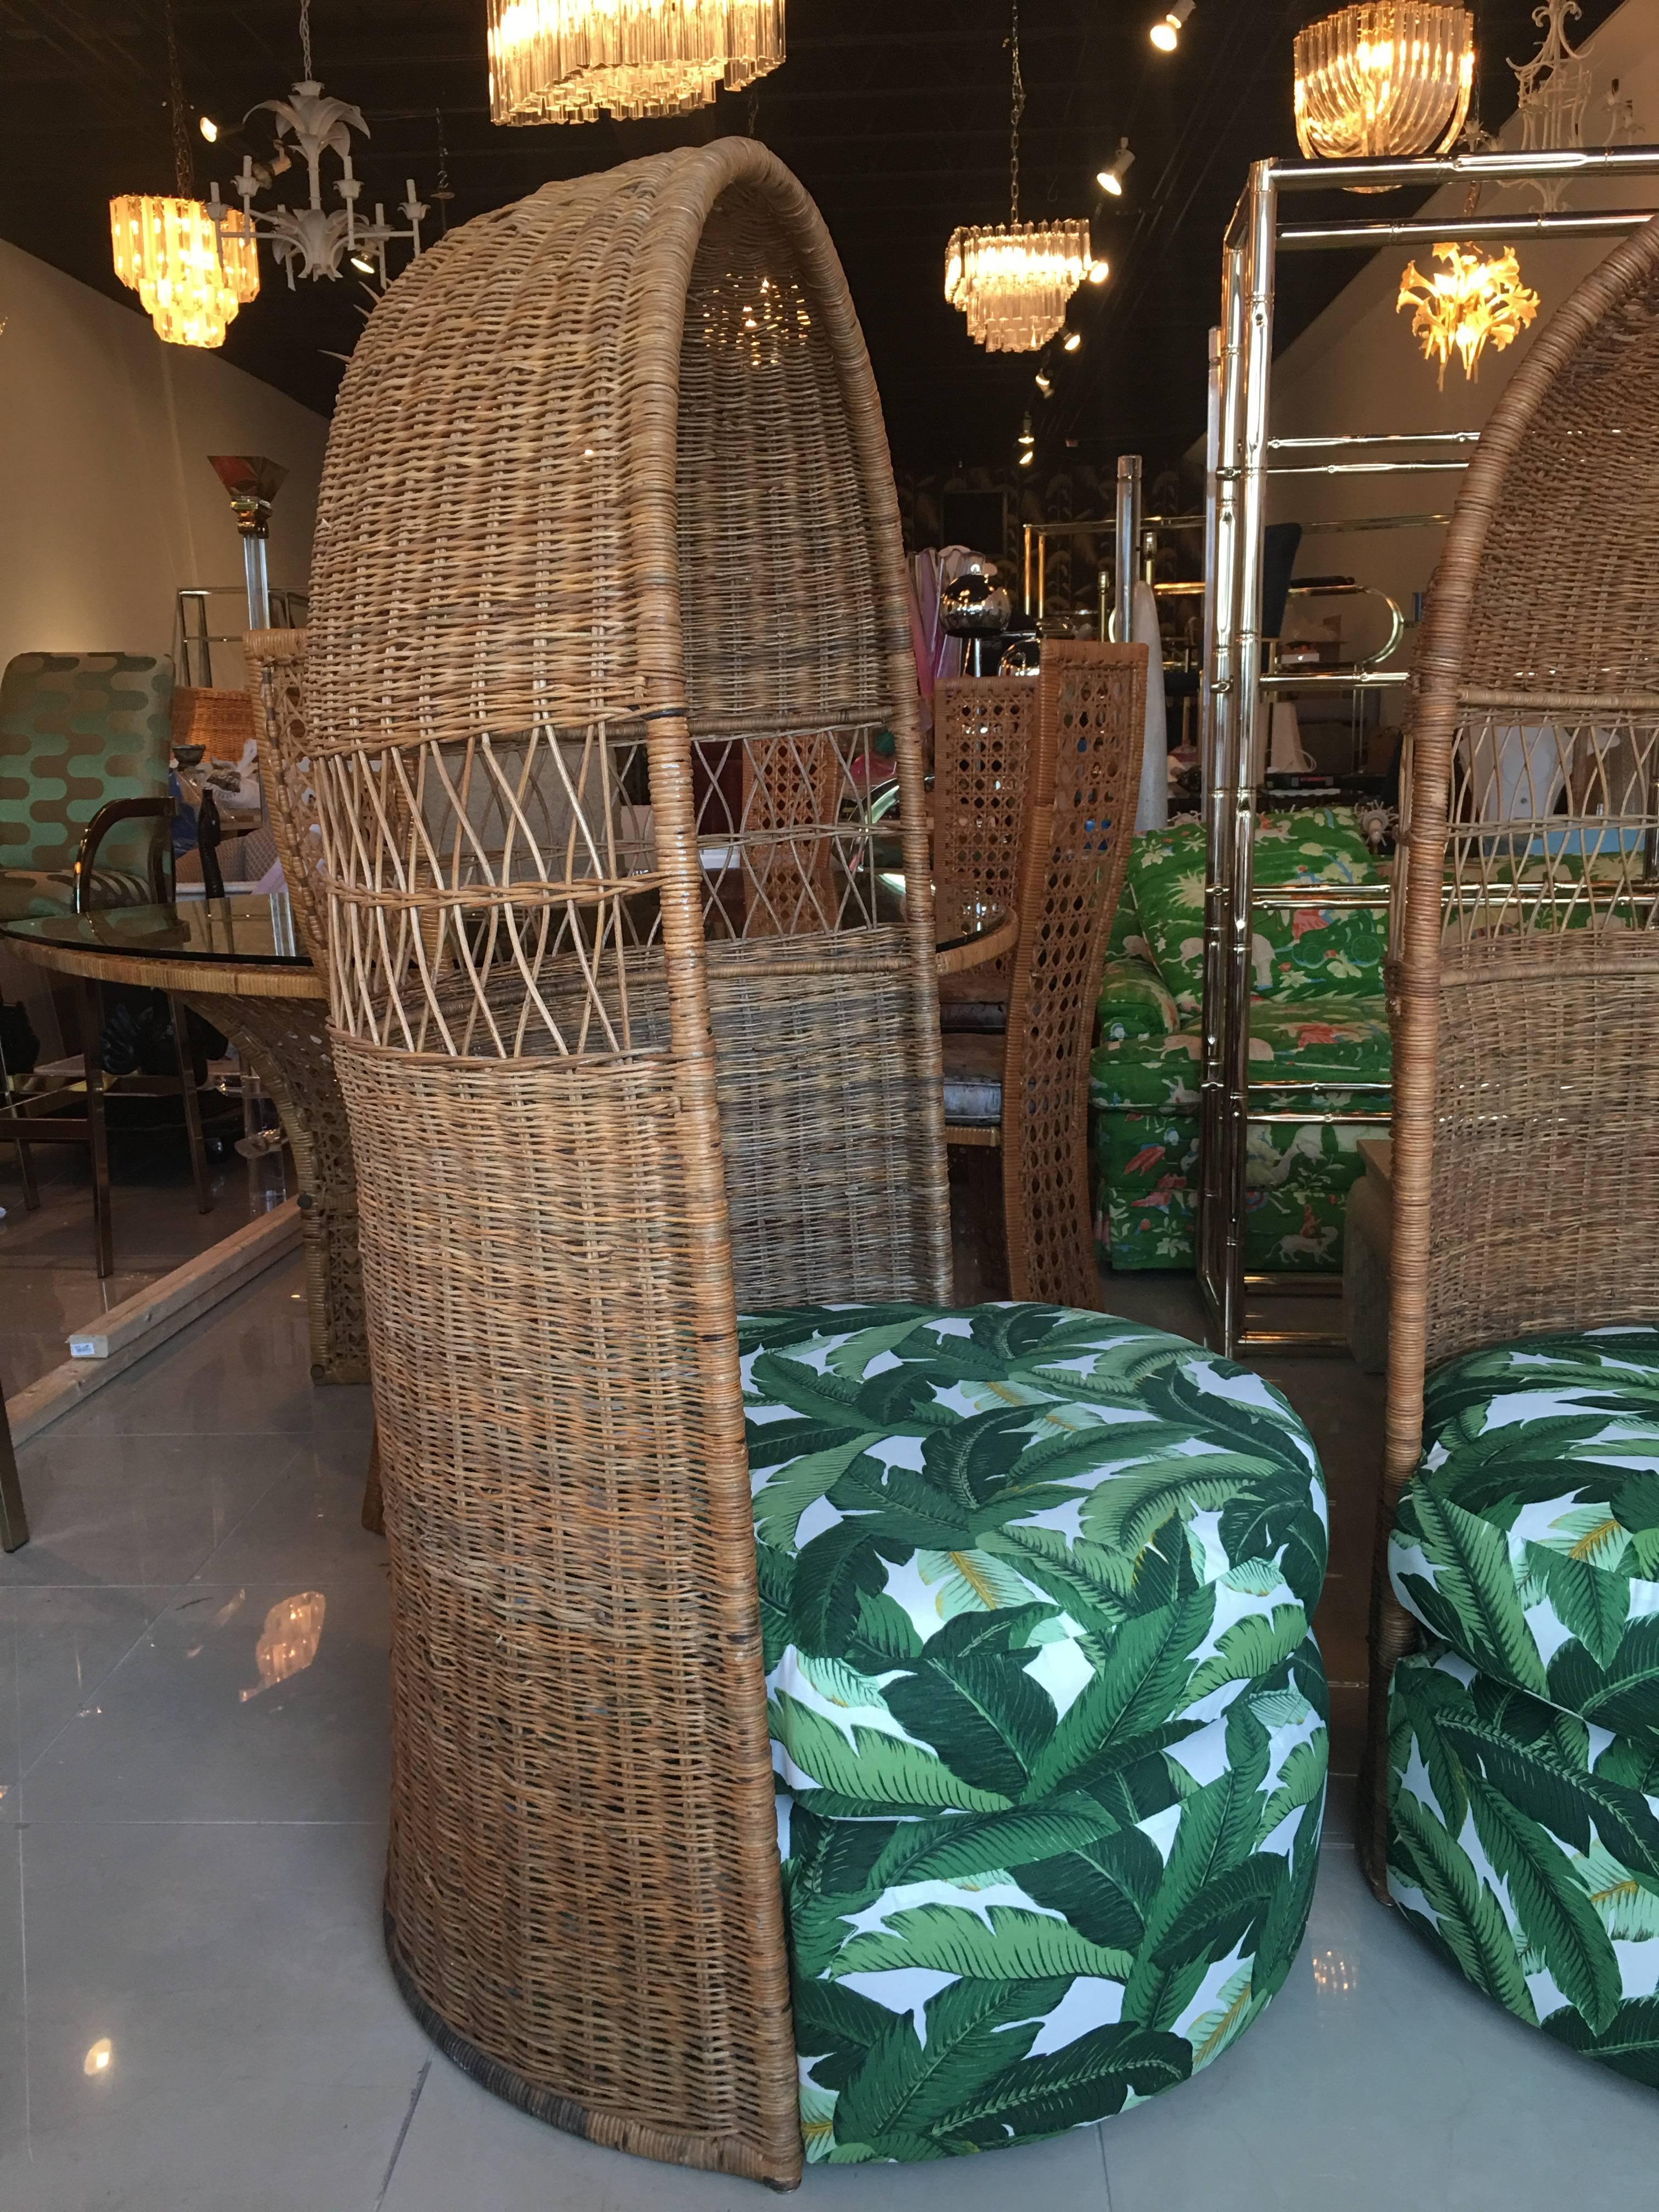 Pair of amazing vintage rattan, wicker hooded, dome chairs. Newly upholstered in a banana leaf indoor, outdoor fabric. Perfect for inside, outside, sunroom, porch or a patio. Great Tropical Palm beach island, Boho feel. Lounge chairs, club chairs 